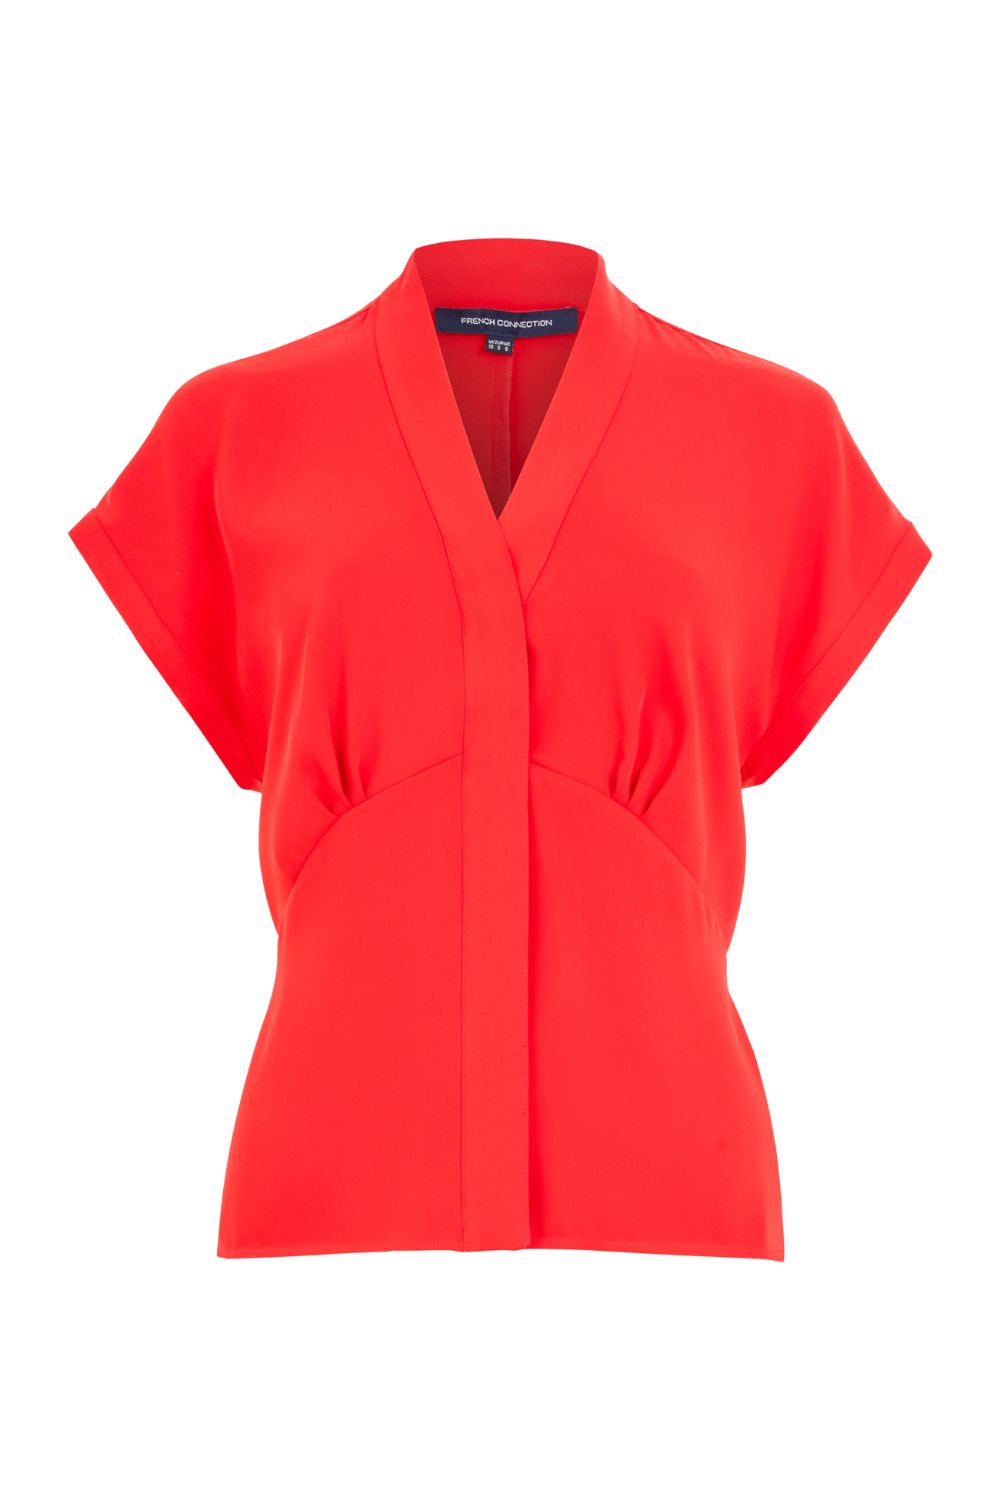 French_Connection_ Carmen_Crepe_ Blouse_True Red_DJV_Boutique_Ipswich